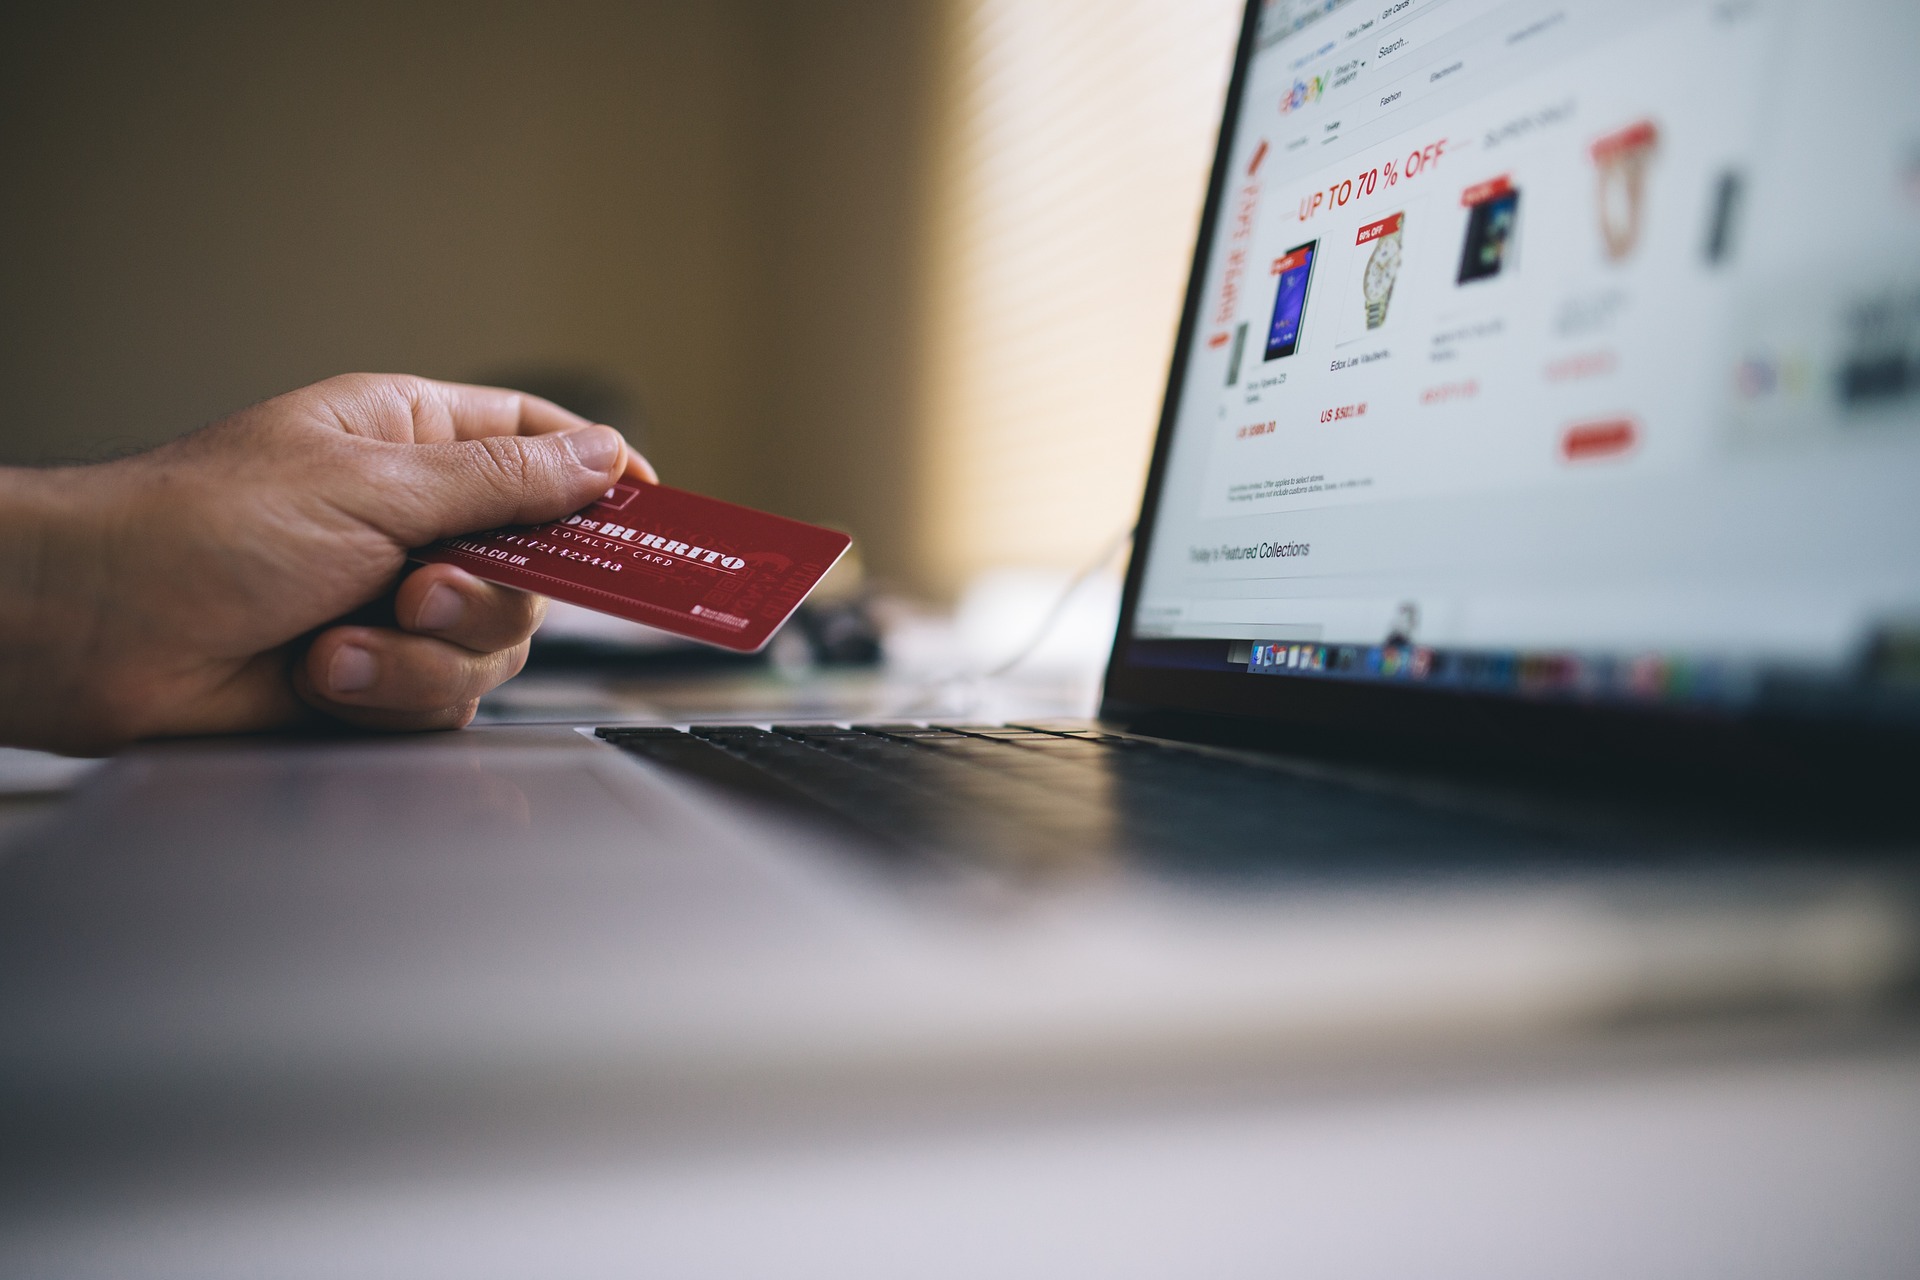 eCommerce market in 2022: Slowing growth, high competition, and more frugal consumers